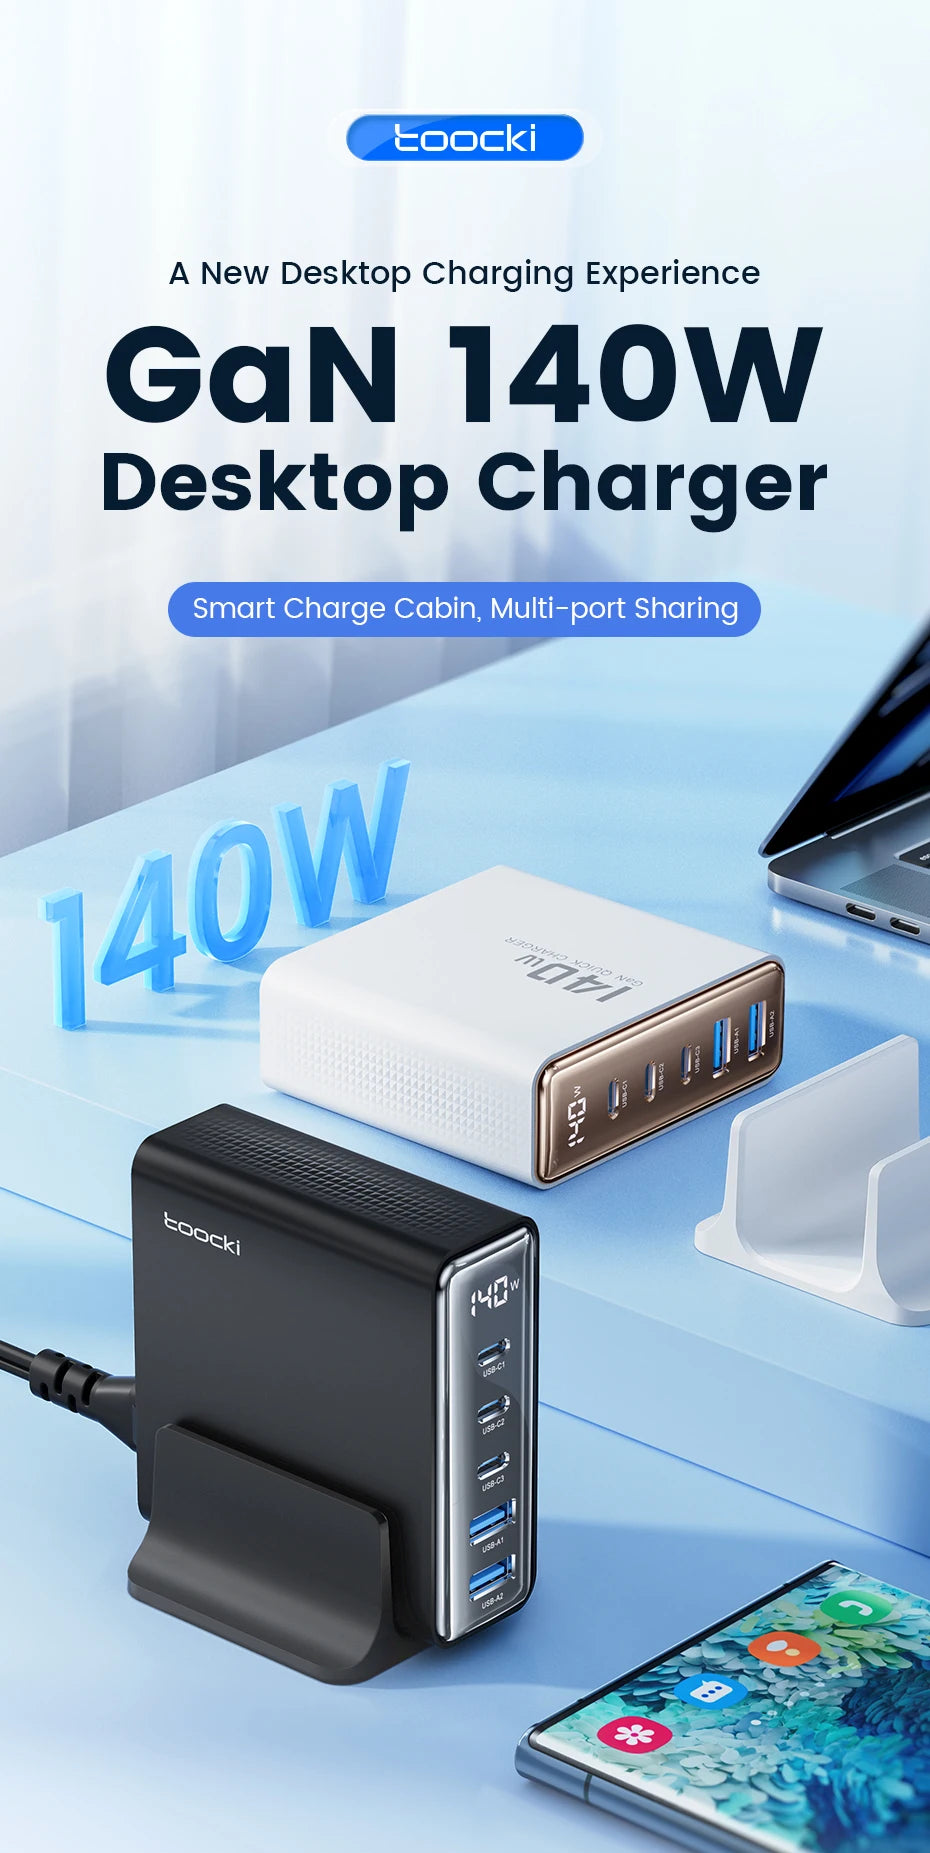 Toocki 140W GaN USB Charger 5in1 Desktop Fast Charge USB Type C Charger LED Display Charger For iPhone Xiaomi Smartphone Laptop